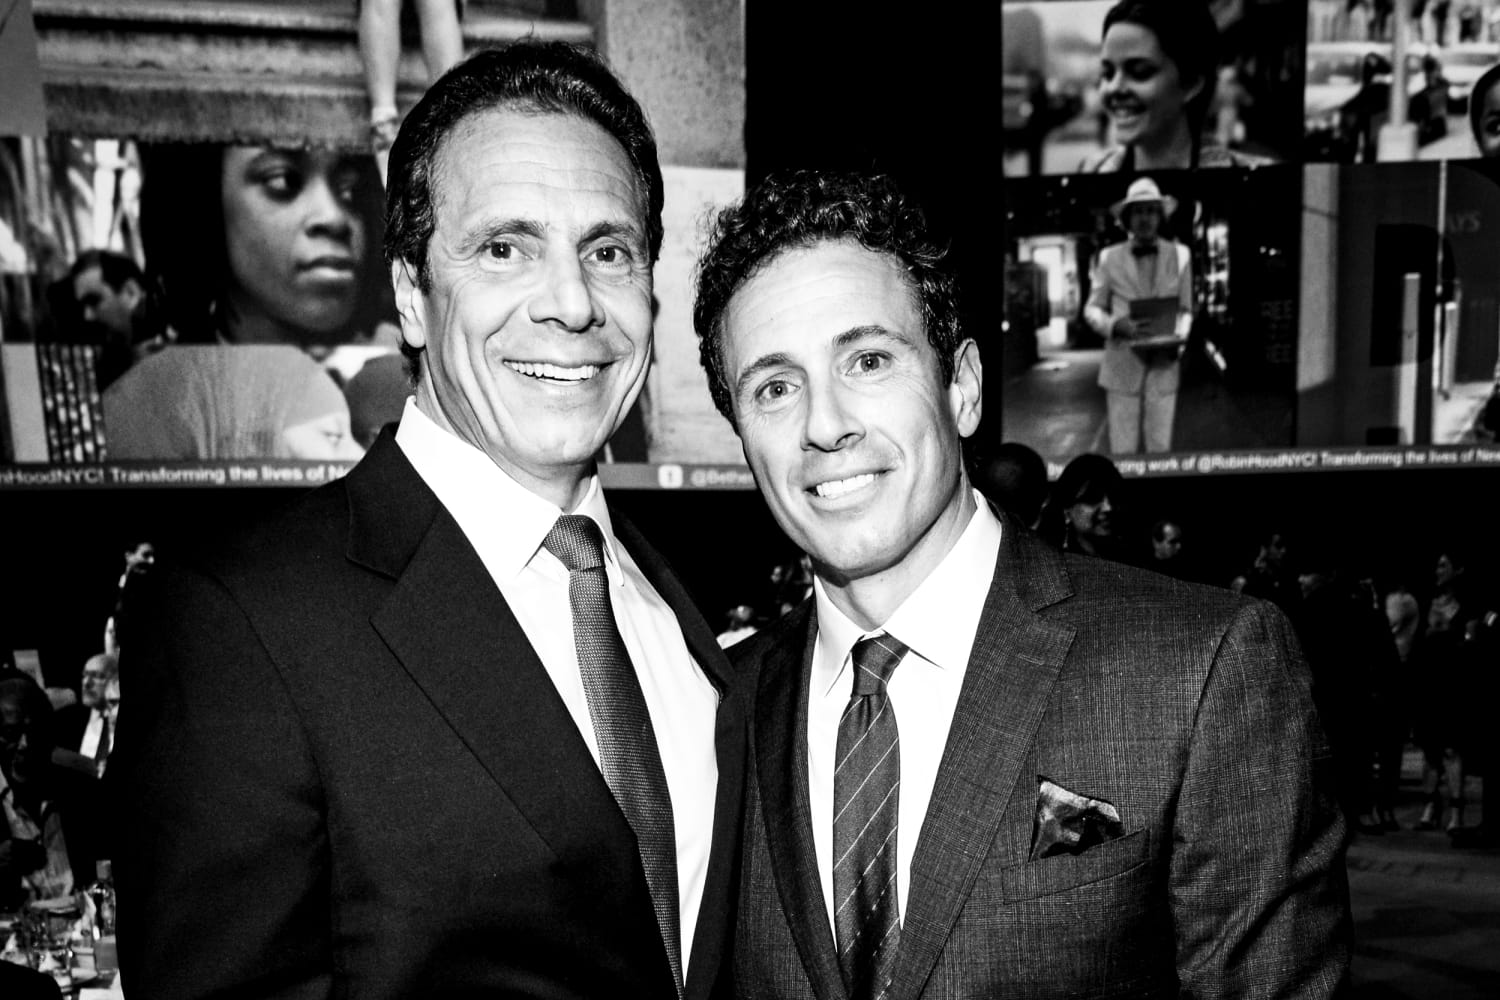 The rise and ignominious fall of CNN star Chris Cuomo